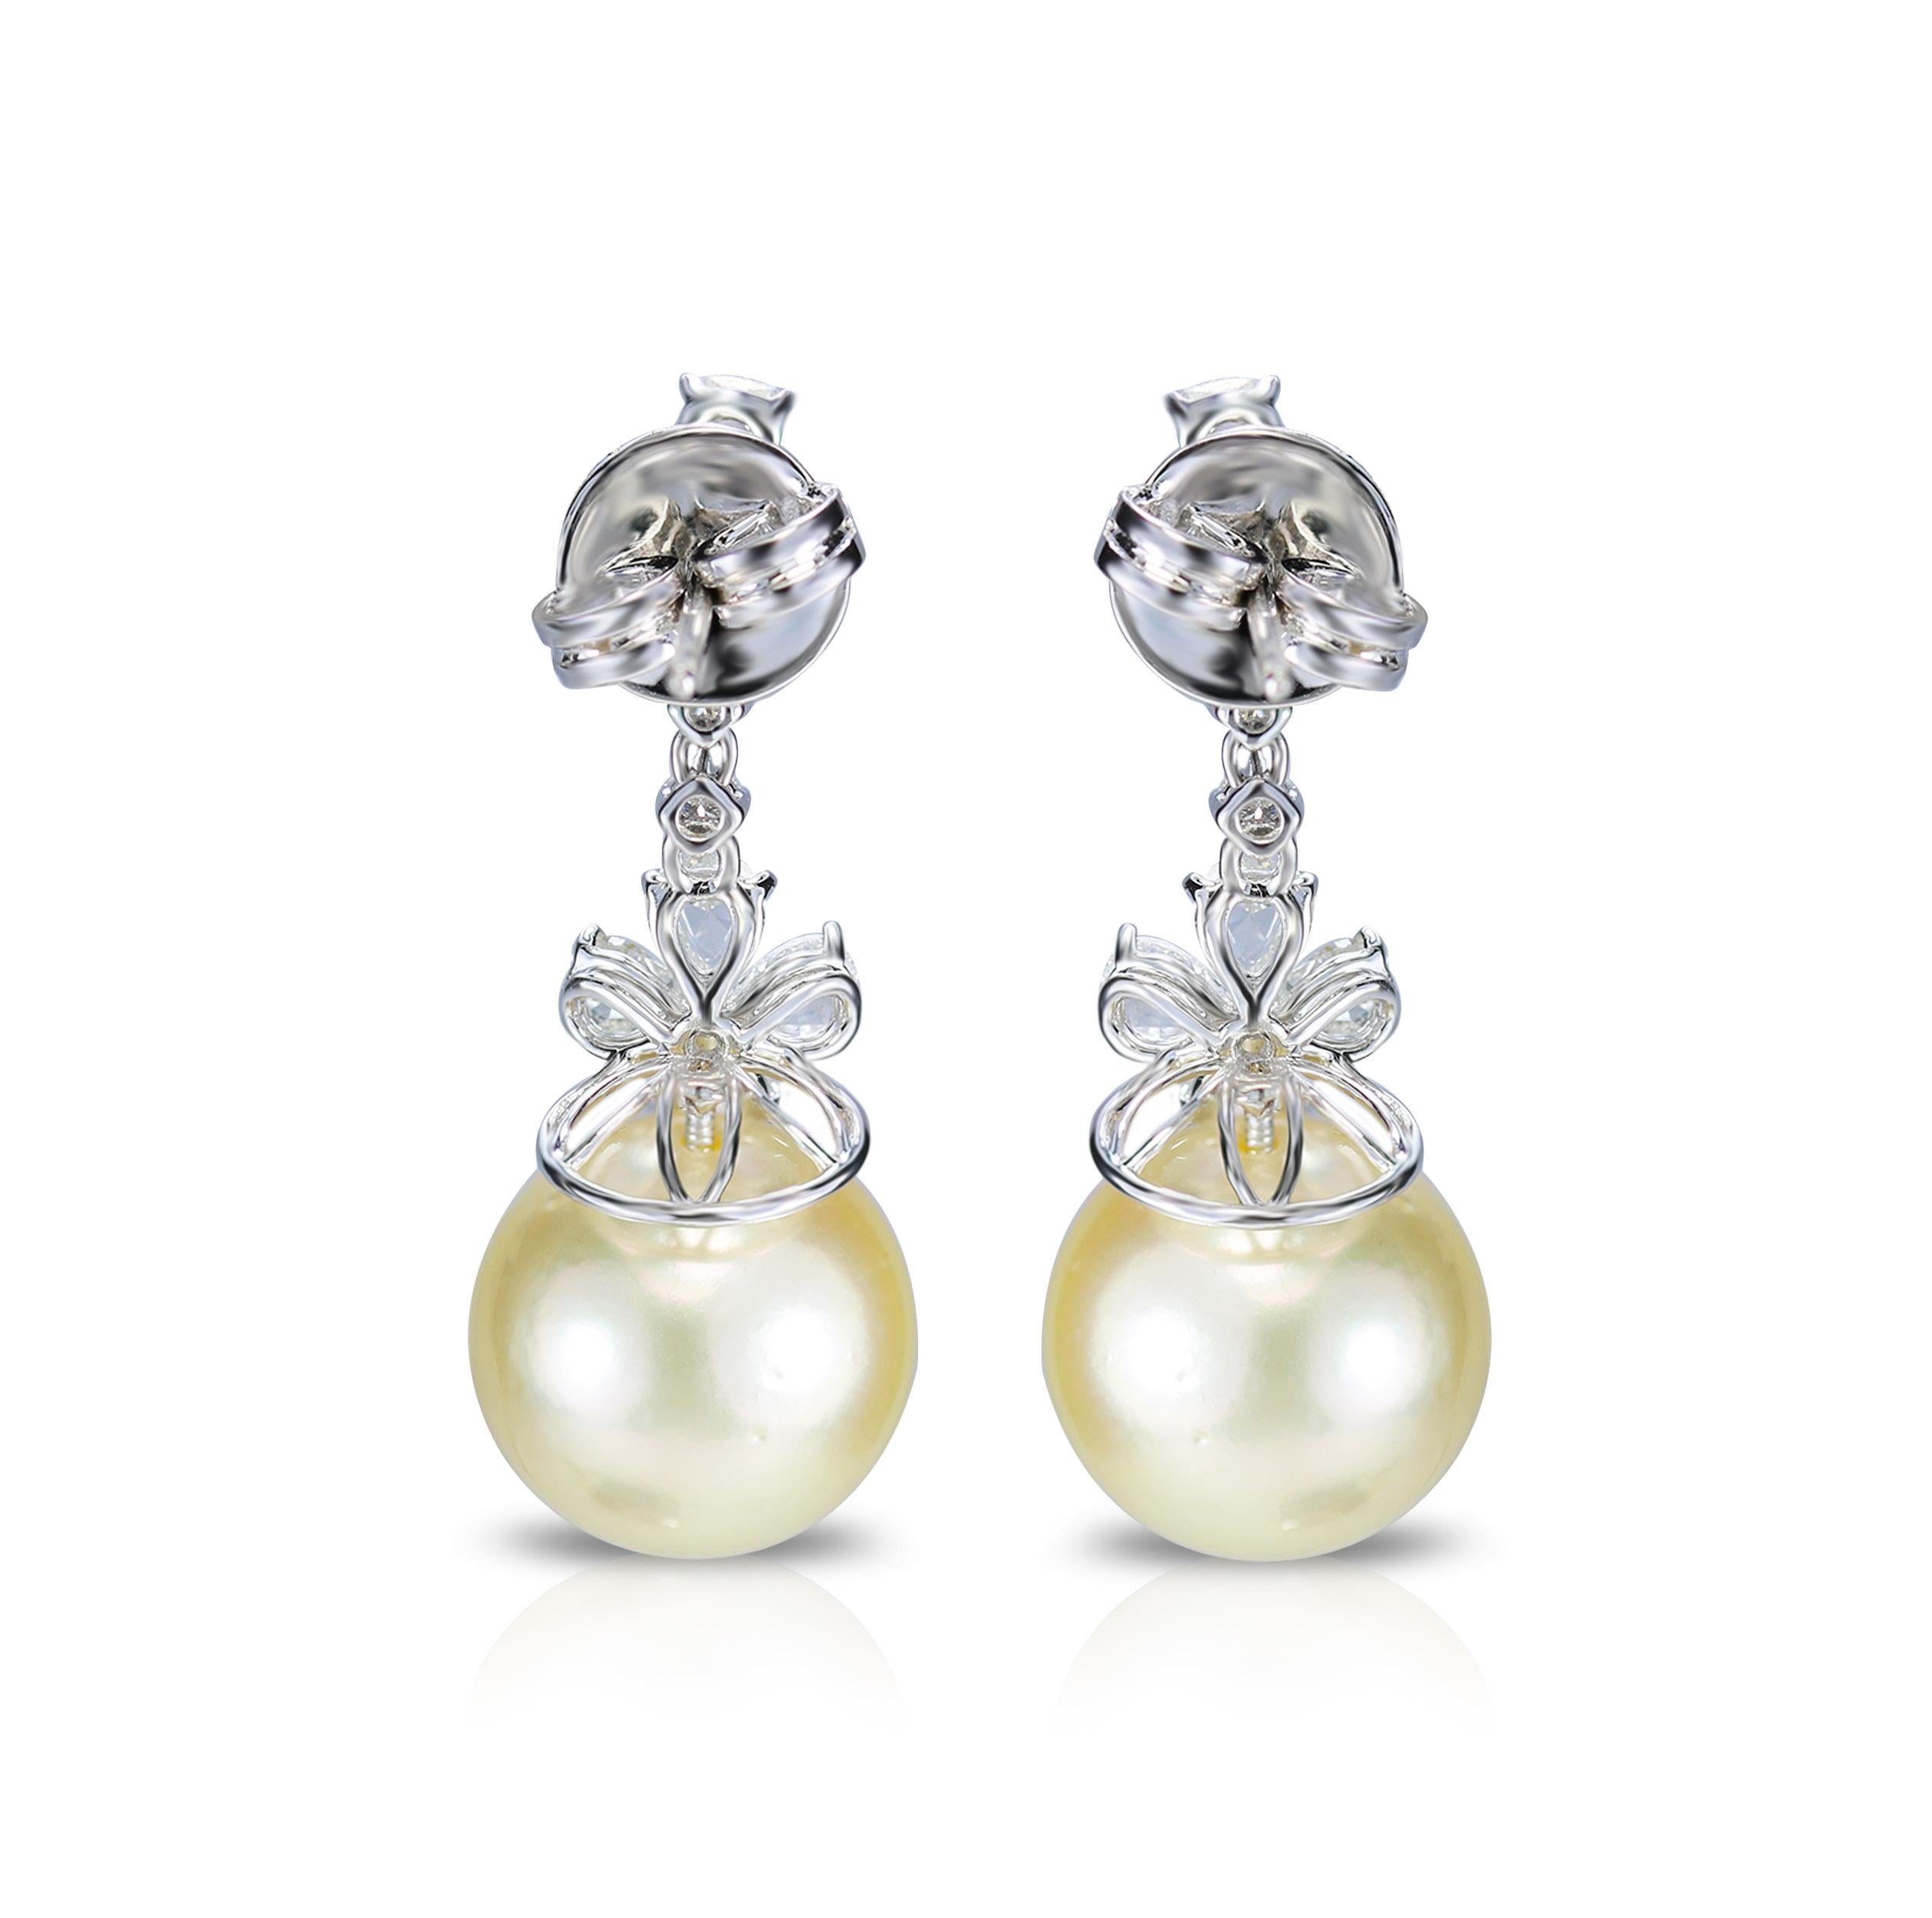 Studio Rêves Pear Rose Cut Diamonds and South Sea Pearl Earrings in 18K Gold For Sale 1